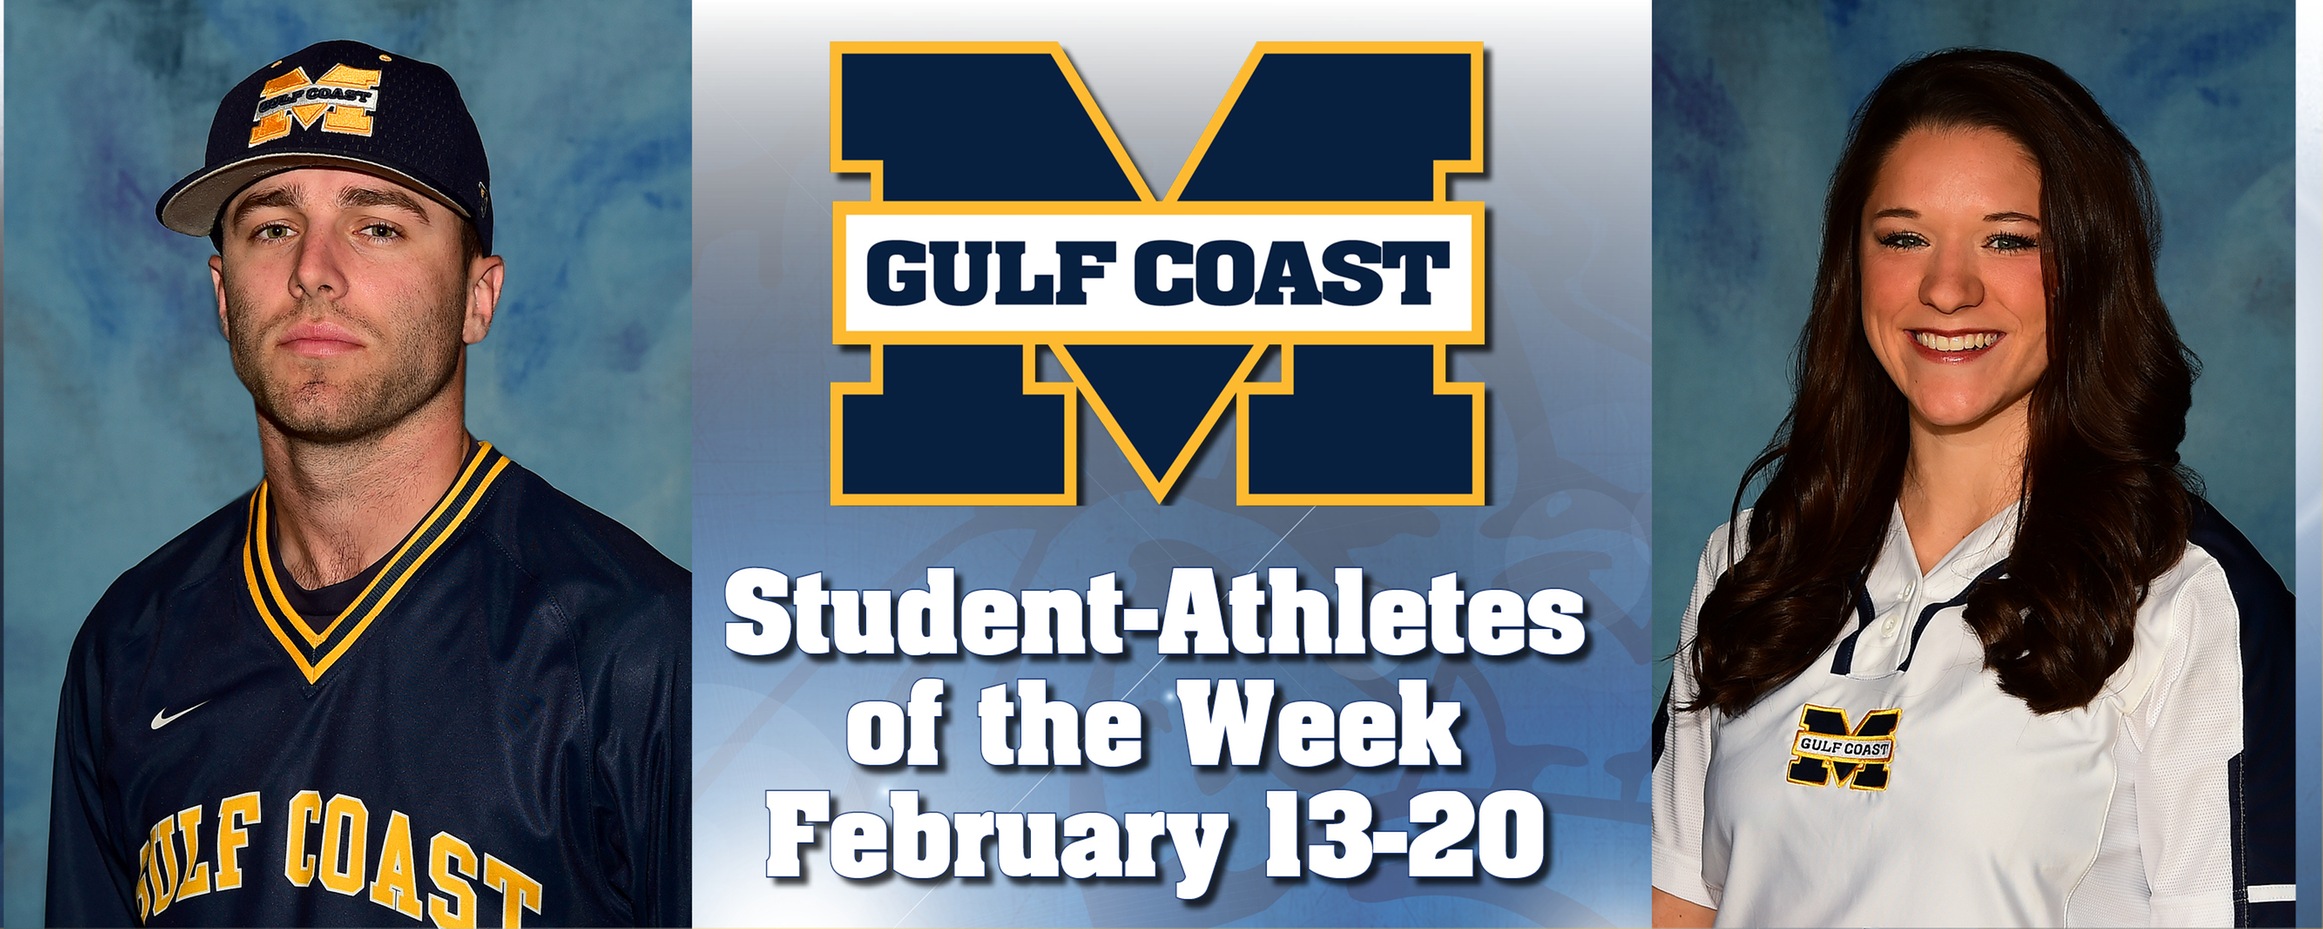 Mills-Derouen, Nichols named MGCCC Student-Athletes of the Week